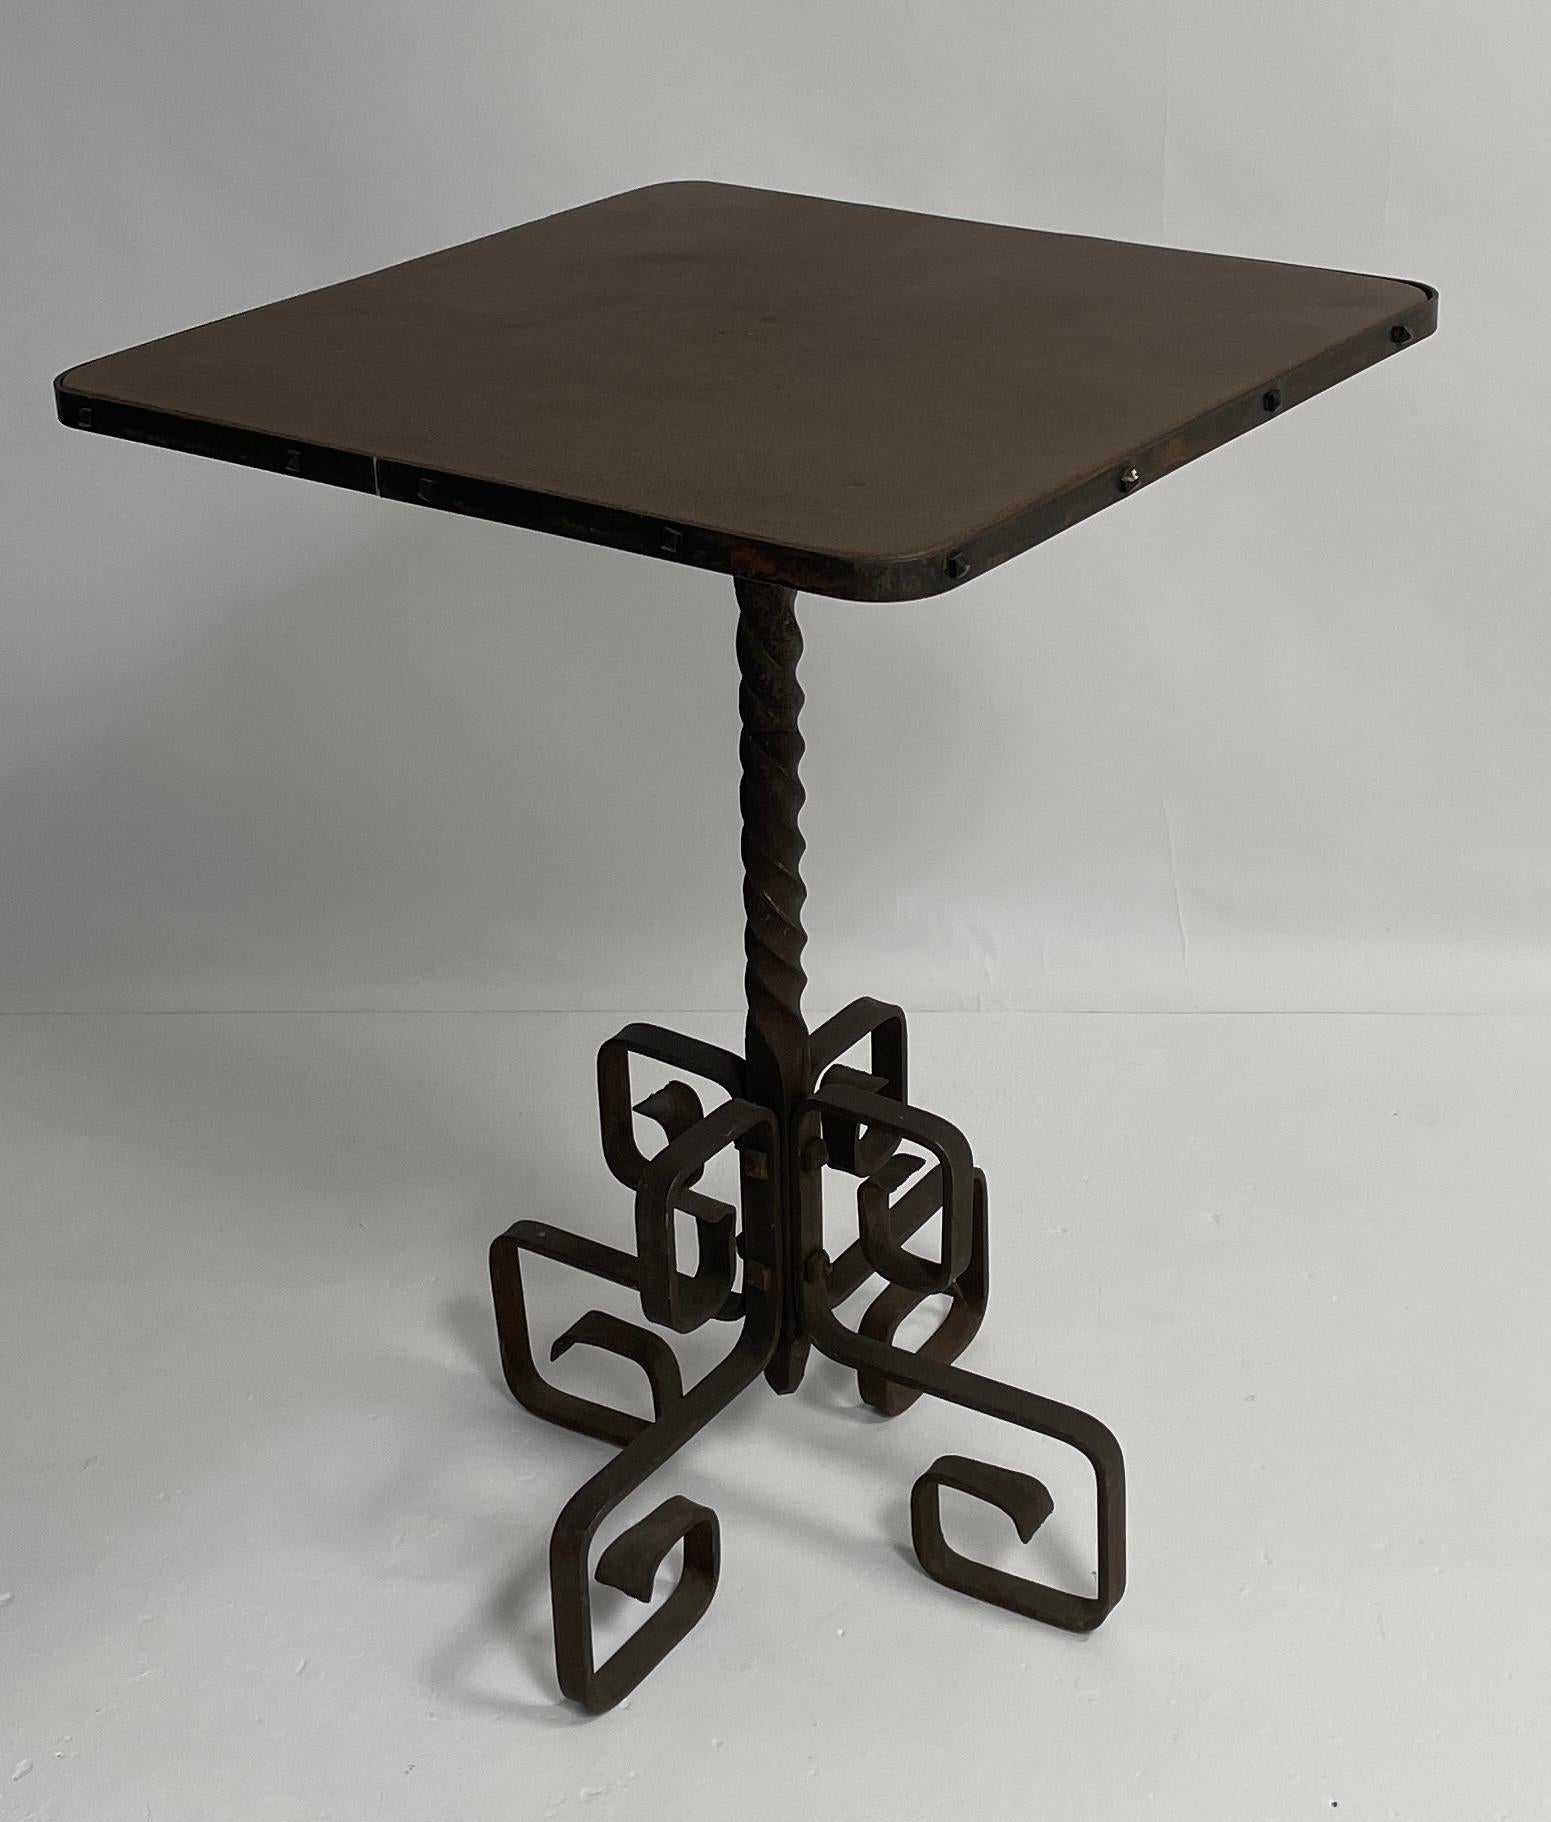 French provincial side table. This high top table has beautiful details on the iron base. The oxidized base is in great condition for its age. The table top has been recovered with an lizard embossed brown leather.